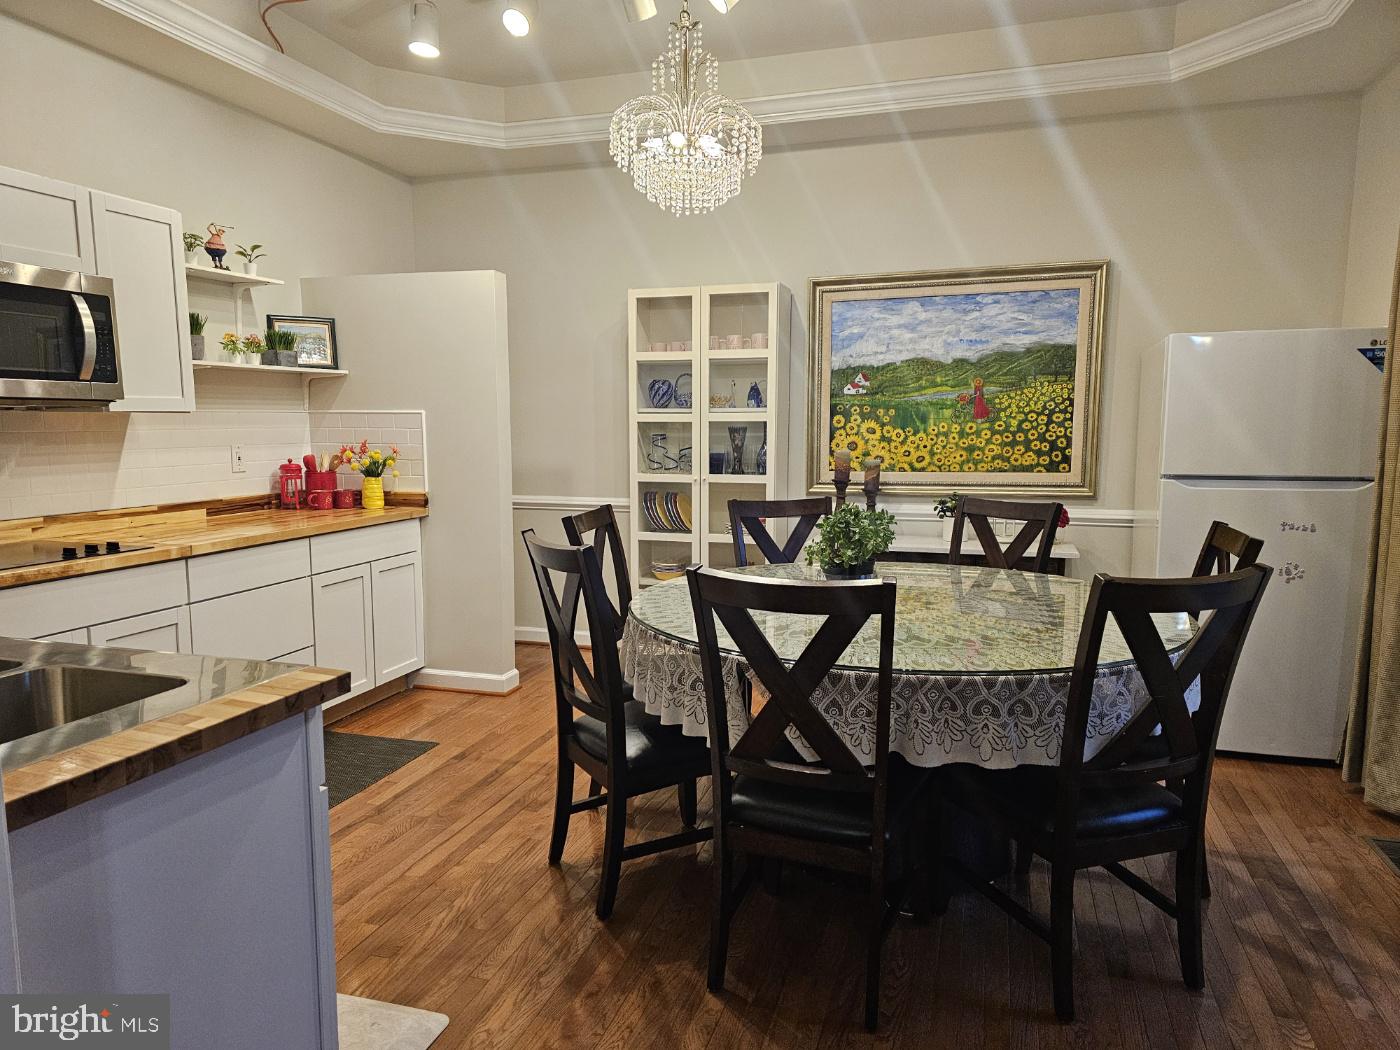 a view of a dining room with furniture a kitchen and chandelier